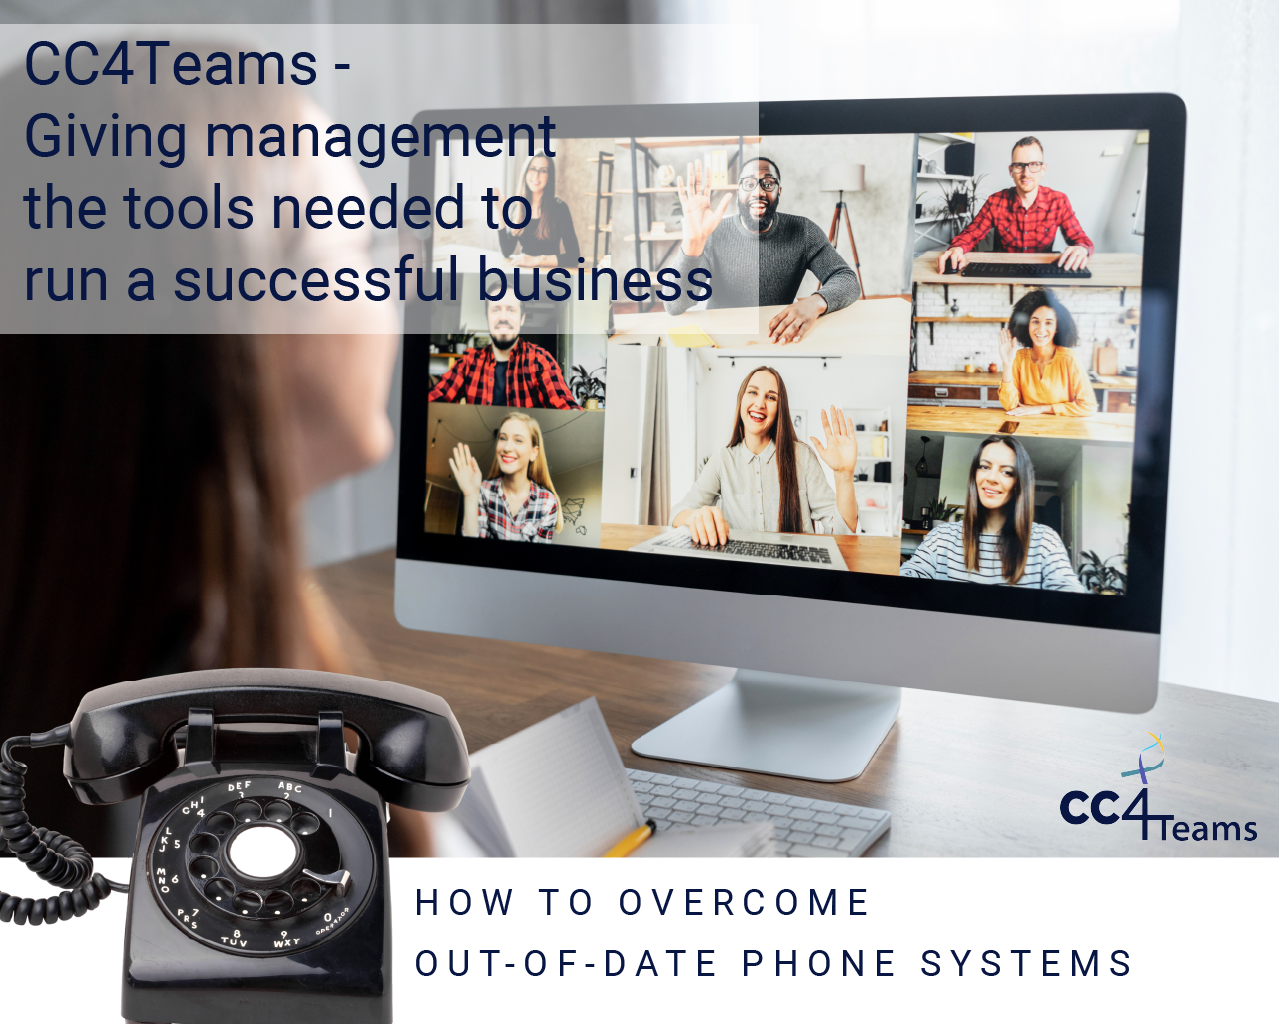 IImparts; How to overcome out-of-date phone systems with CC4Teams